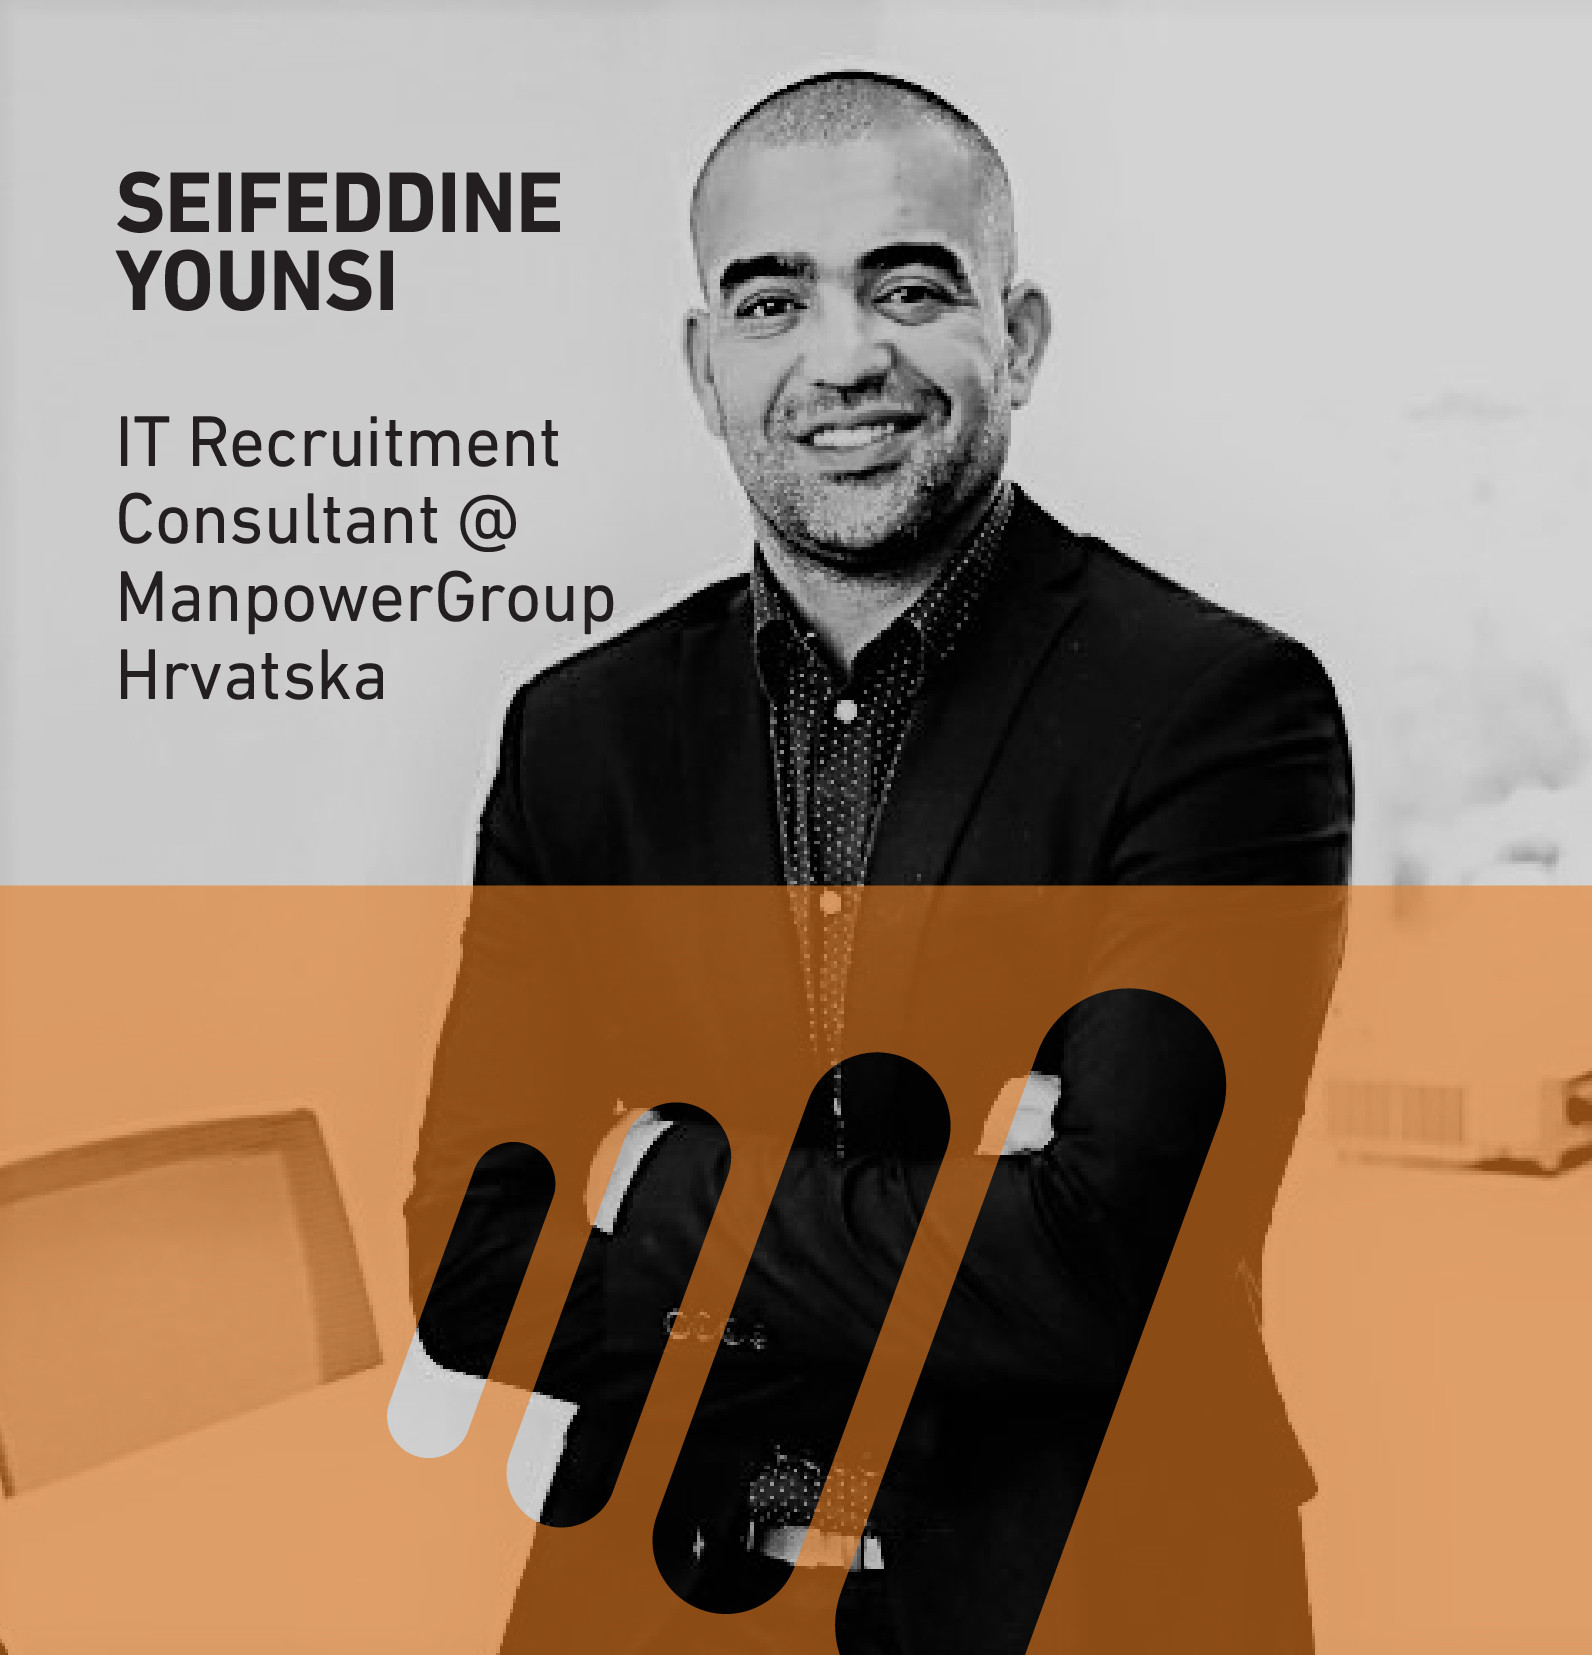 SEIFEDDINE YOUNSI – up close and personal